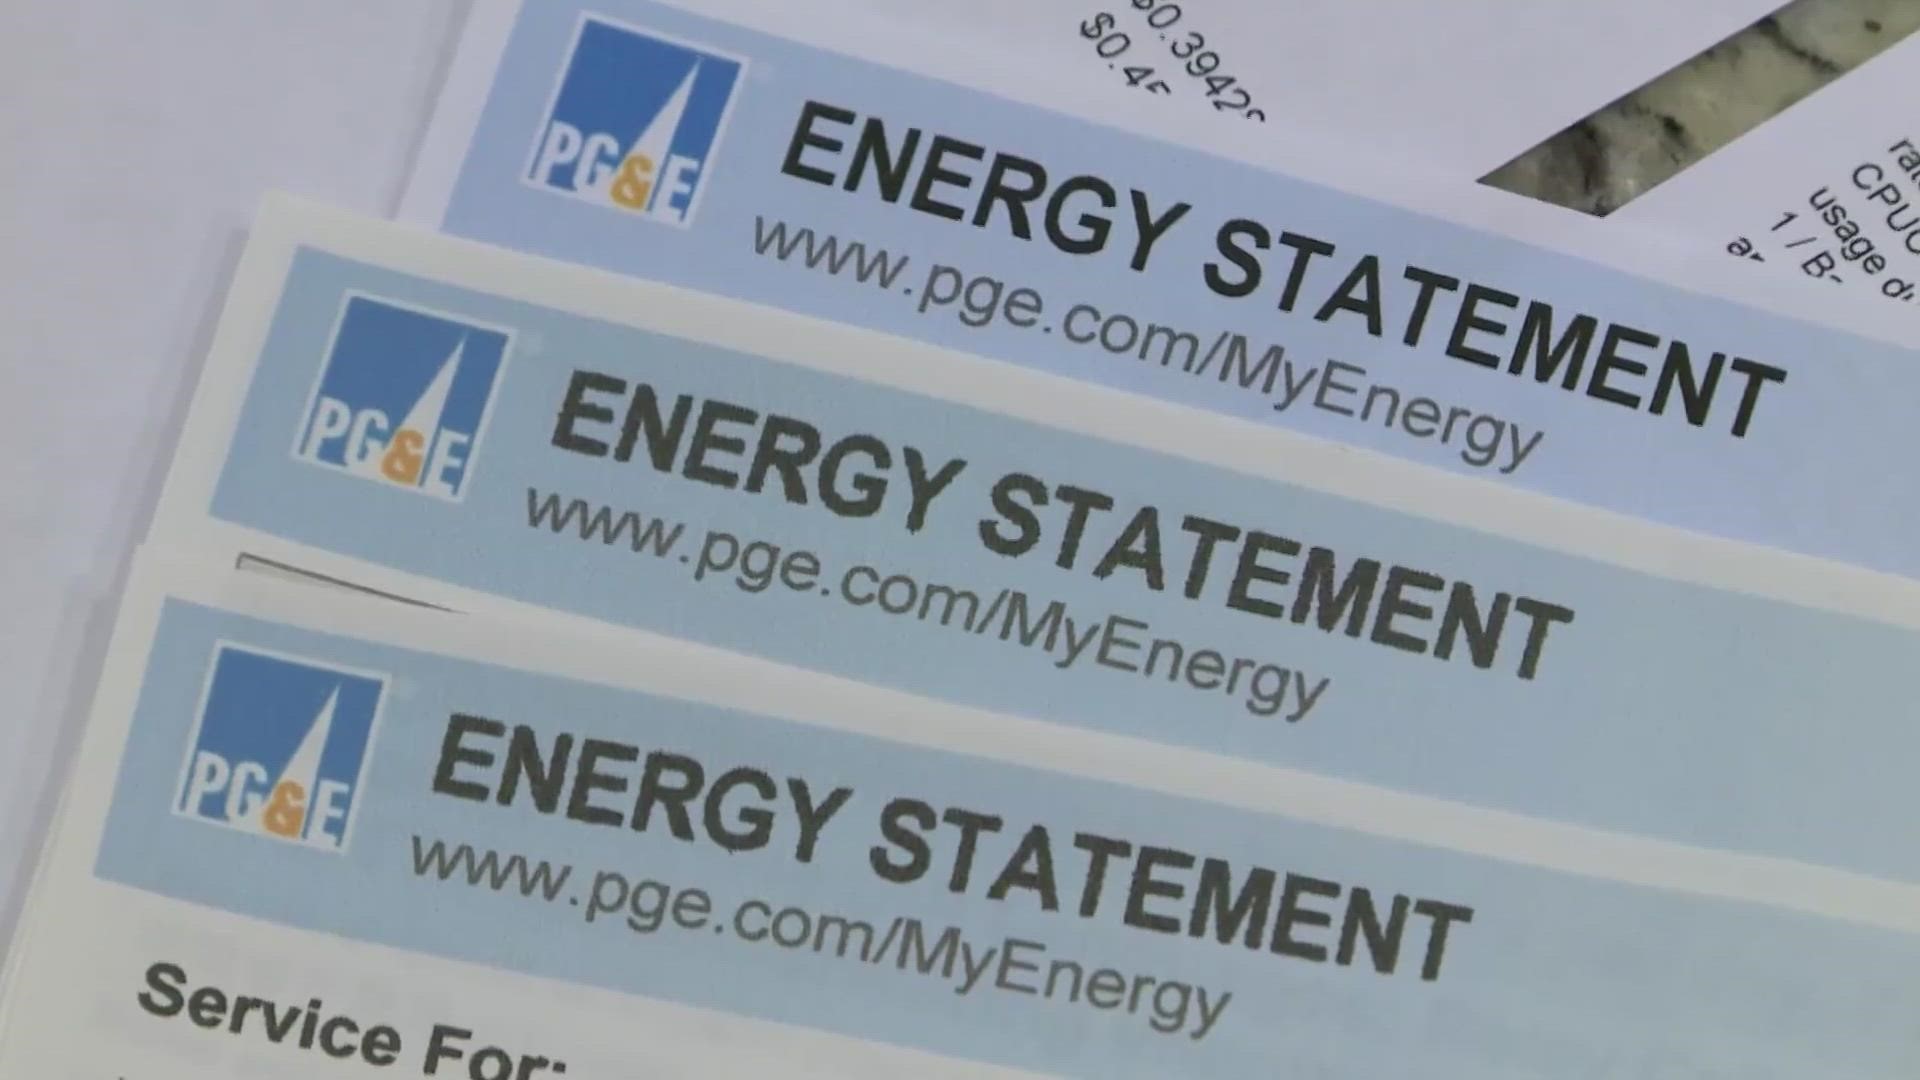 A Sacramento woman said she was caught off guard when her PG&E bill jumped from $24 to $400 in a month. Here's why the jump happened.